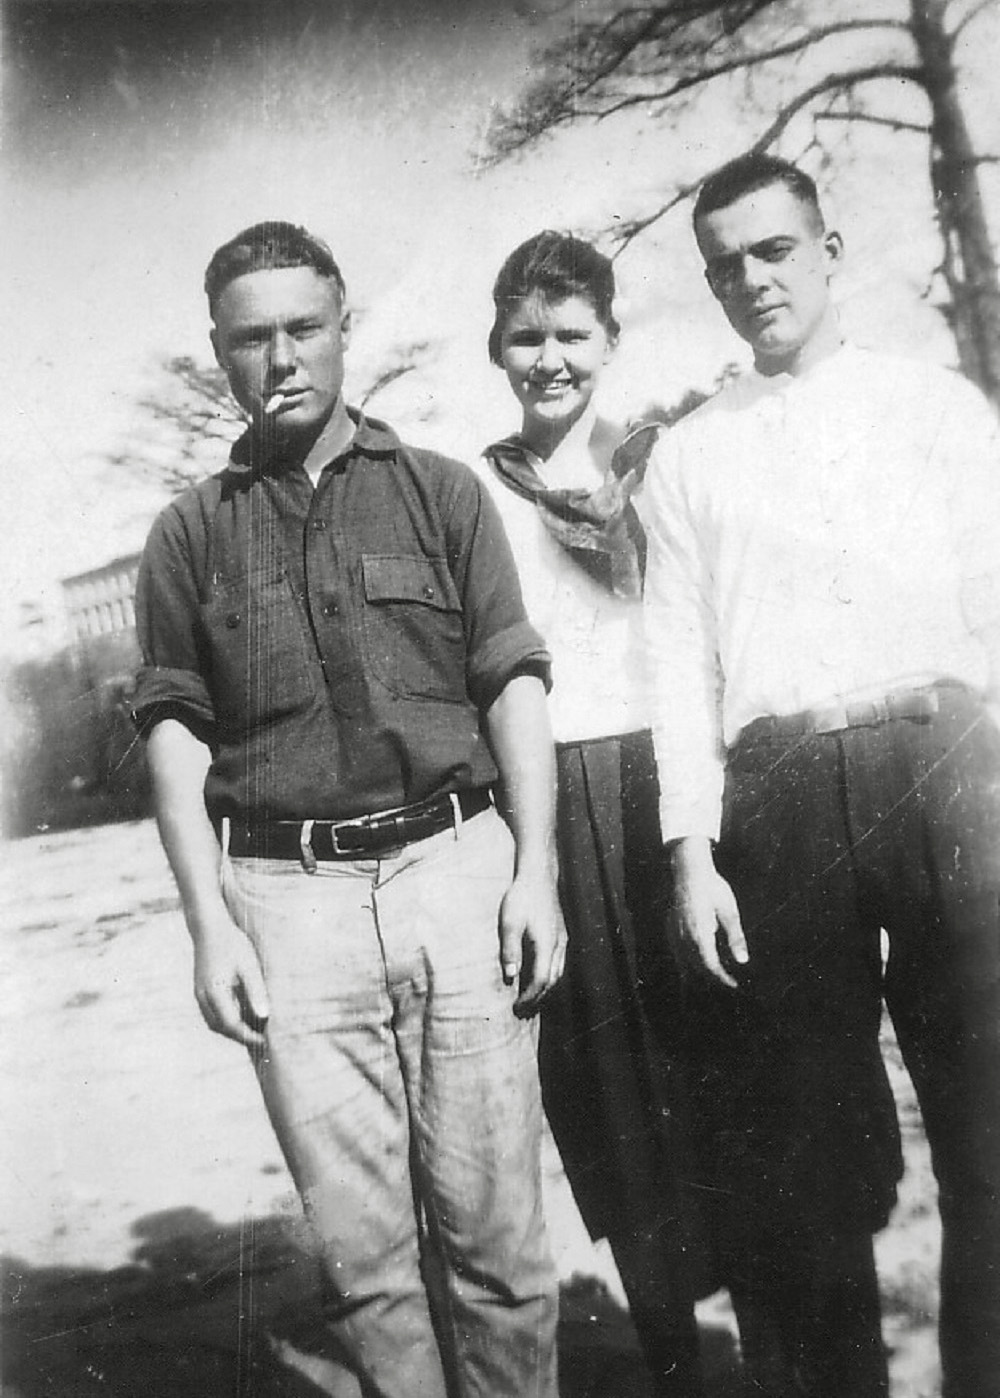 On right, my grandfather, Ernest Mathis, and unidentified friends.  About 1920 in Tallassee, Alabama. View full size.